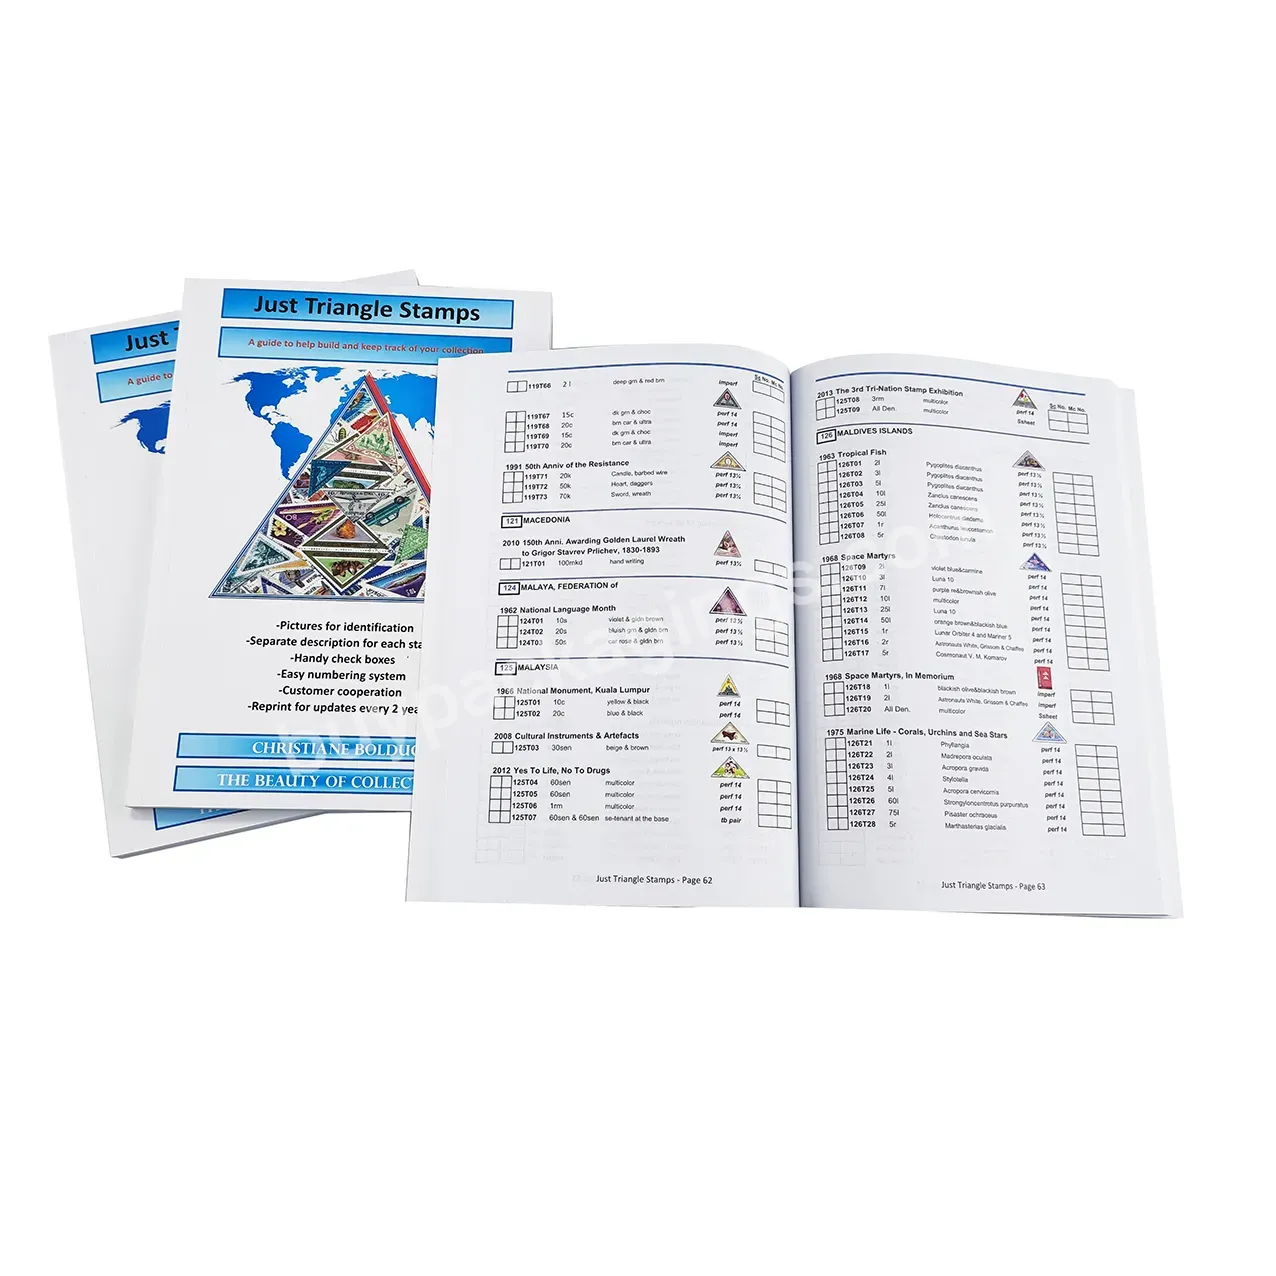 Wholesale High Quality Catalog Printing For Advertising - Buy High Quality Catalog Printing,Catalog Printing,Catalog Printing For Advertising.